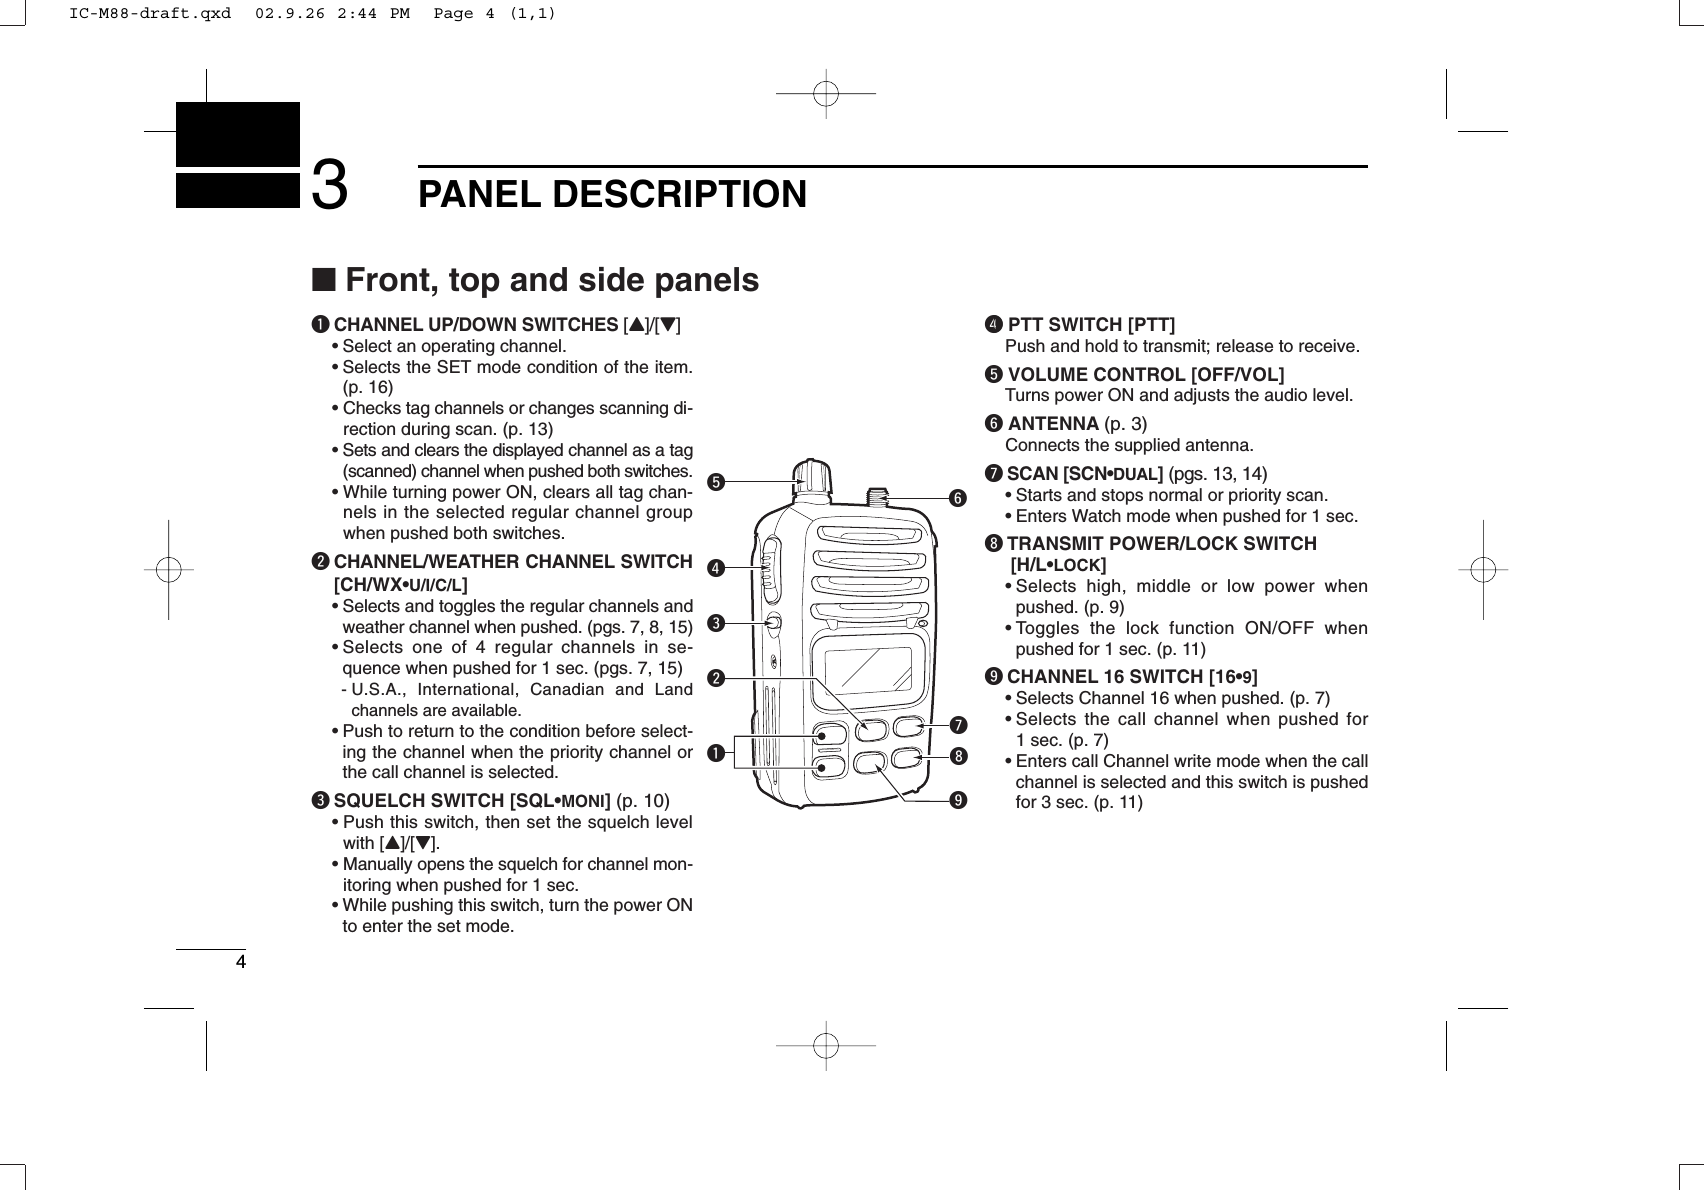 43PANEL DESCRIPTIONqCHANNEL UP/DOWN SWITCHES [Y]/[Z]•Select an operating channel.•Selects the SET mode condition of the item.(p. 16)• Checks tag channels or changes scanning di-rection during scan. (p. 13)•Sets and clears the displayed channel as a tag(scanned) channel when pushed both switches.• While turning power ON, clears all tag chan-nels in the selected regular channel groupwhen pushed both switches.wCHANNEL/WEATHER CHANNEL SWITCH[CH/WX•U/I/C/L]•Selects and toggles the regular channels andweather channel when pushed. (pgs. 7, 8, 15)•Selects one of 4 regular channels in se-quence when pushed for 1 sec. (pgs. 7, 15)- U.S.A., International, Canadian and Landchannels are available.•Push to return to the condition before select-ing the channel when the priority channel orthe call channel is selected.eSQUELCH SWITCH [SQL•MONI] (p. 10)•Push this switch, then set the squelch levelwith [Y]/[Z].• Manually opens the squelch for channel mon-itoring when pushed for 1 sec.•While pushing this switch, turn the power ONto enter the set mode.r0 PTT SWITCH [PTT]Push and hold to transmit; release to receive.tVOLUME CONTROL [OFF/VOL]Turns power ON and adjusts the audio level.yANTENNA (p. 3)Connects the supplied antenna.uSCAN [SCN•DUAL] (pgs. 13, 14)•Starts and stops normal or priority scan.•Enters Watch mode when pushed for 1 sec.iTRANSMIT POWER/LOCK SWITCH[H/L•LOCK]•Selects high, middle or low power whenpushed. (p. 9)•Toggles the lock function ON/OFF whenpushed for 1 sec. (p. 11)oCHANNEL 16 SWITCH [16•9]•Selects Channel 16 when pushed. (p. 7)•Selects the call channel when pushed for1 sec. (p. 7)•Enters call Channel write mode when the callchannel is selected and this switch is pushedfor 3 sec. (p. 11)quiwertyo■Front, top and side panelsIC-M88-draft.qxd  02.9.26 2:44 PM  Page 4 (1,1)